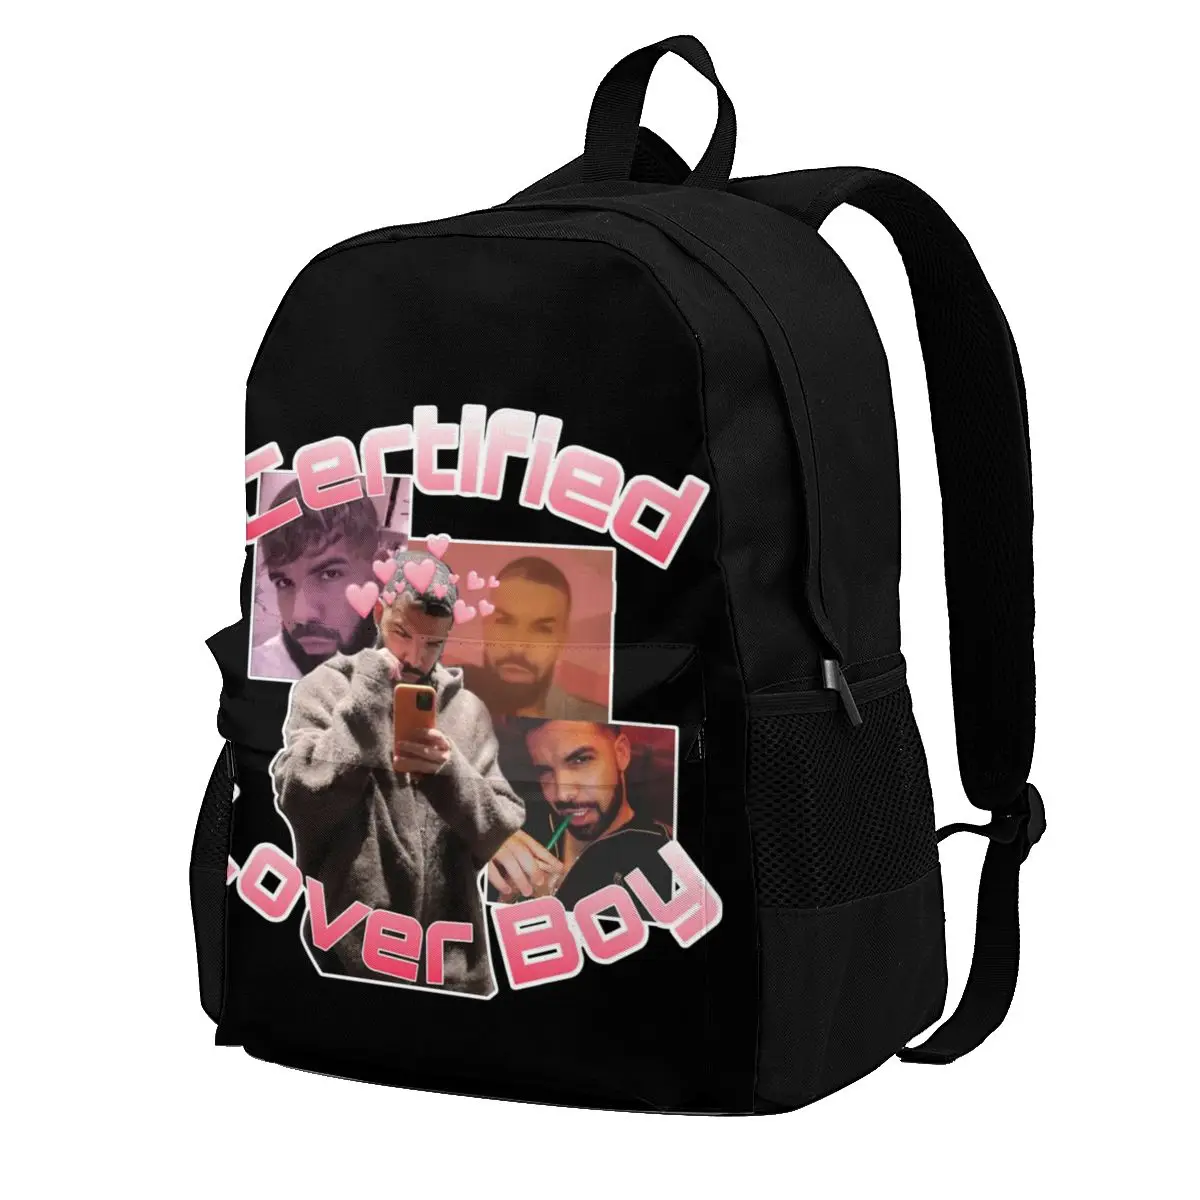 

Clb Drake Retro Funny Art Backpacks singer rap famous lover boy Soft Fashion Polyester Backpack Primary School Female Bags